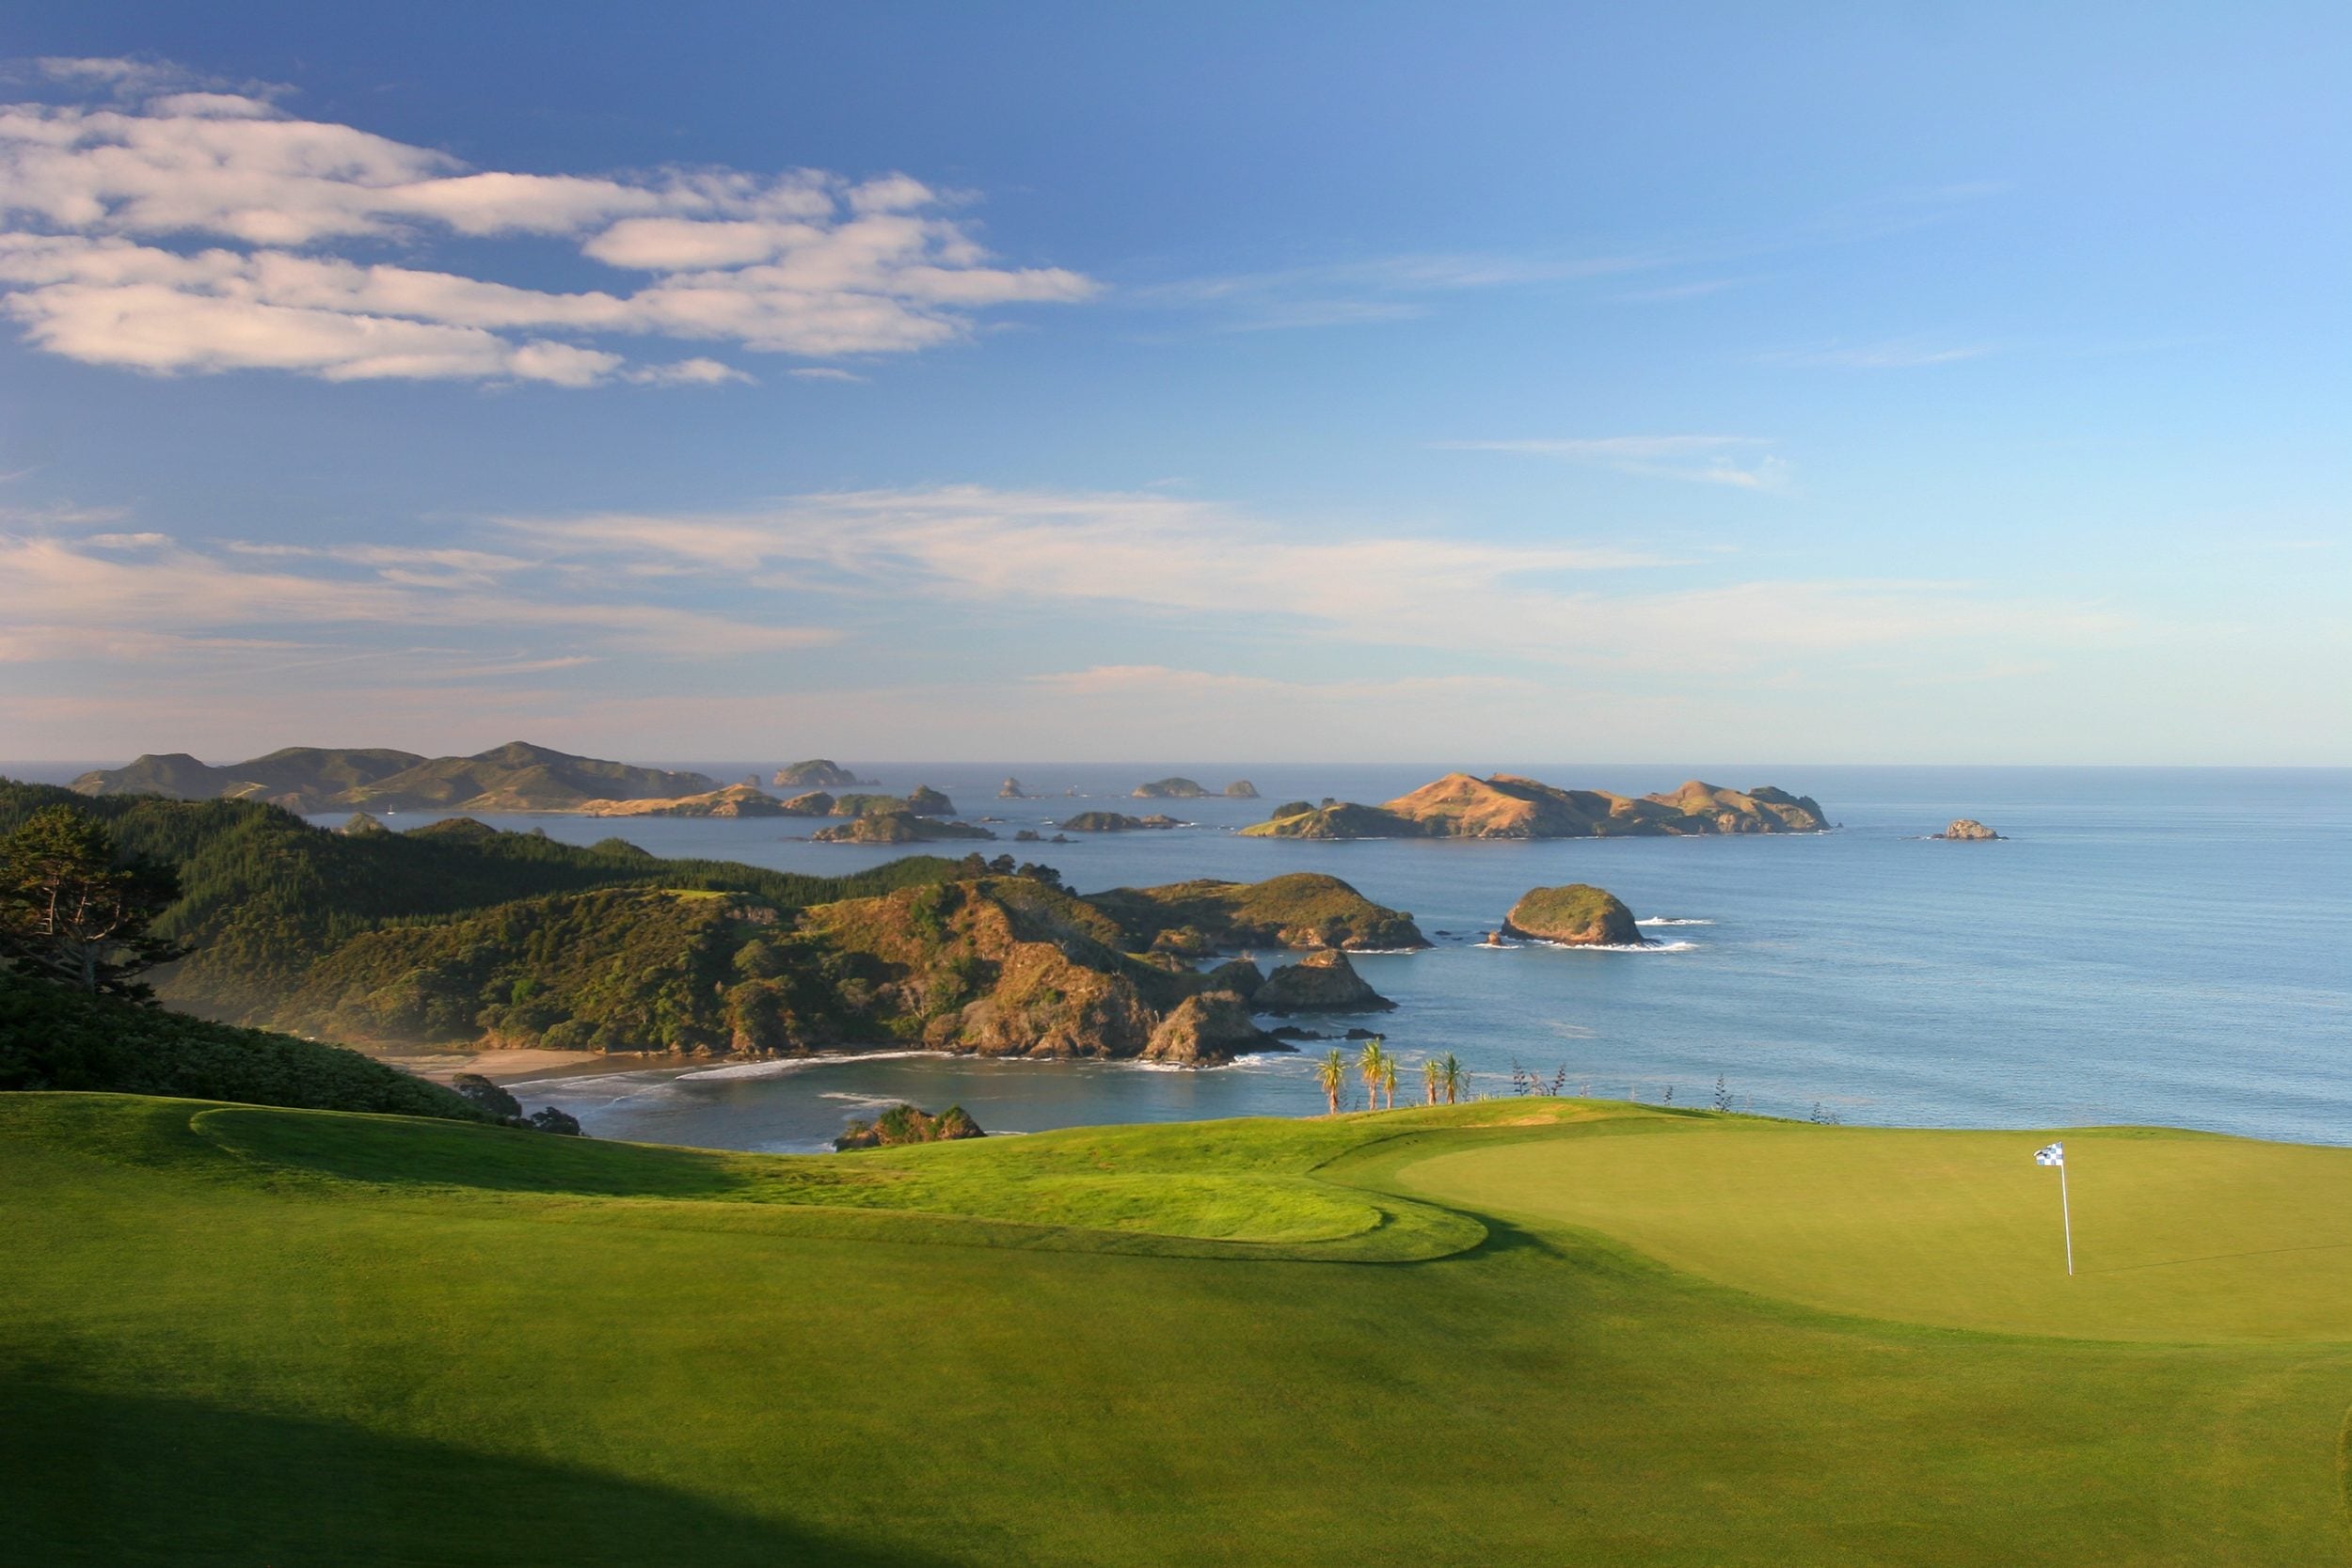 Image overlooking the 16th green on Kauri Cliffs' renowned golf course